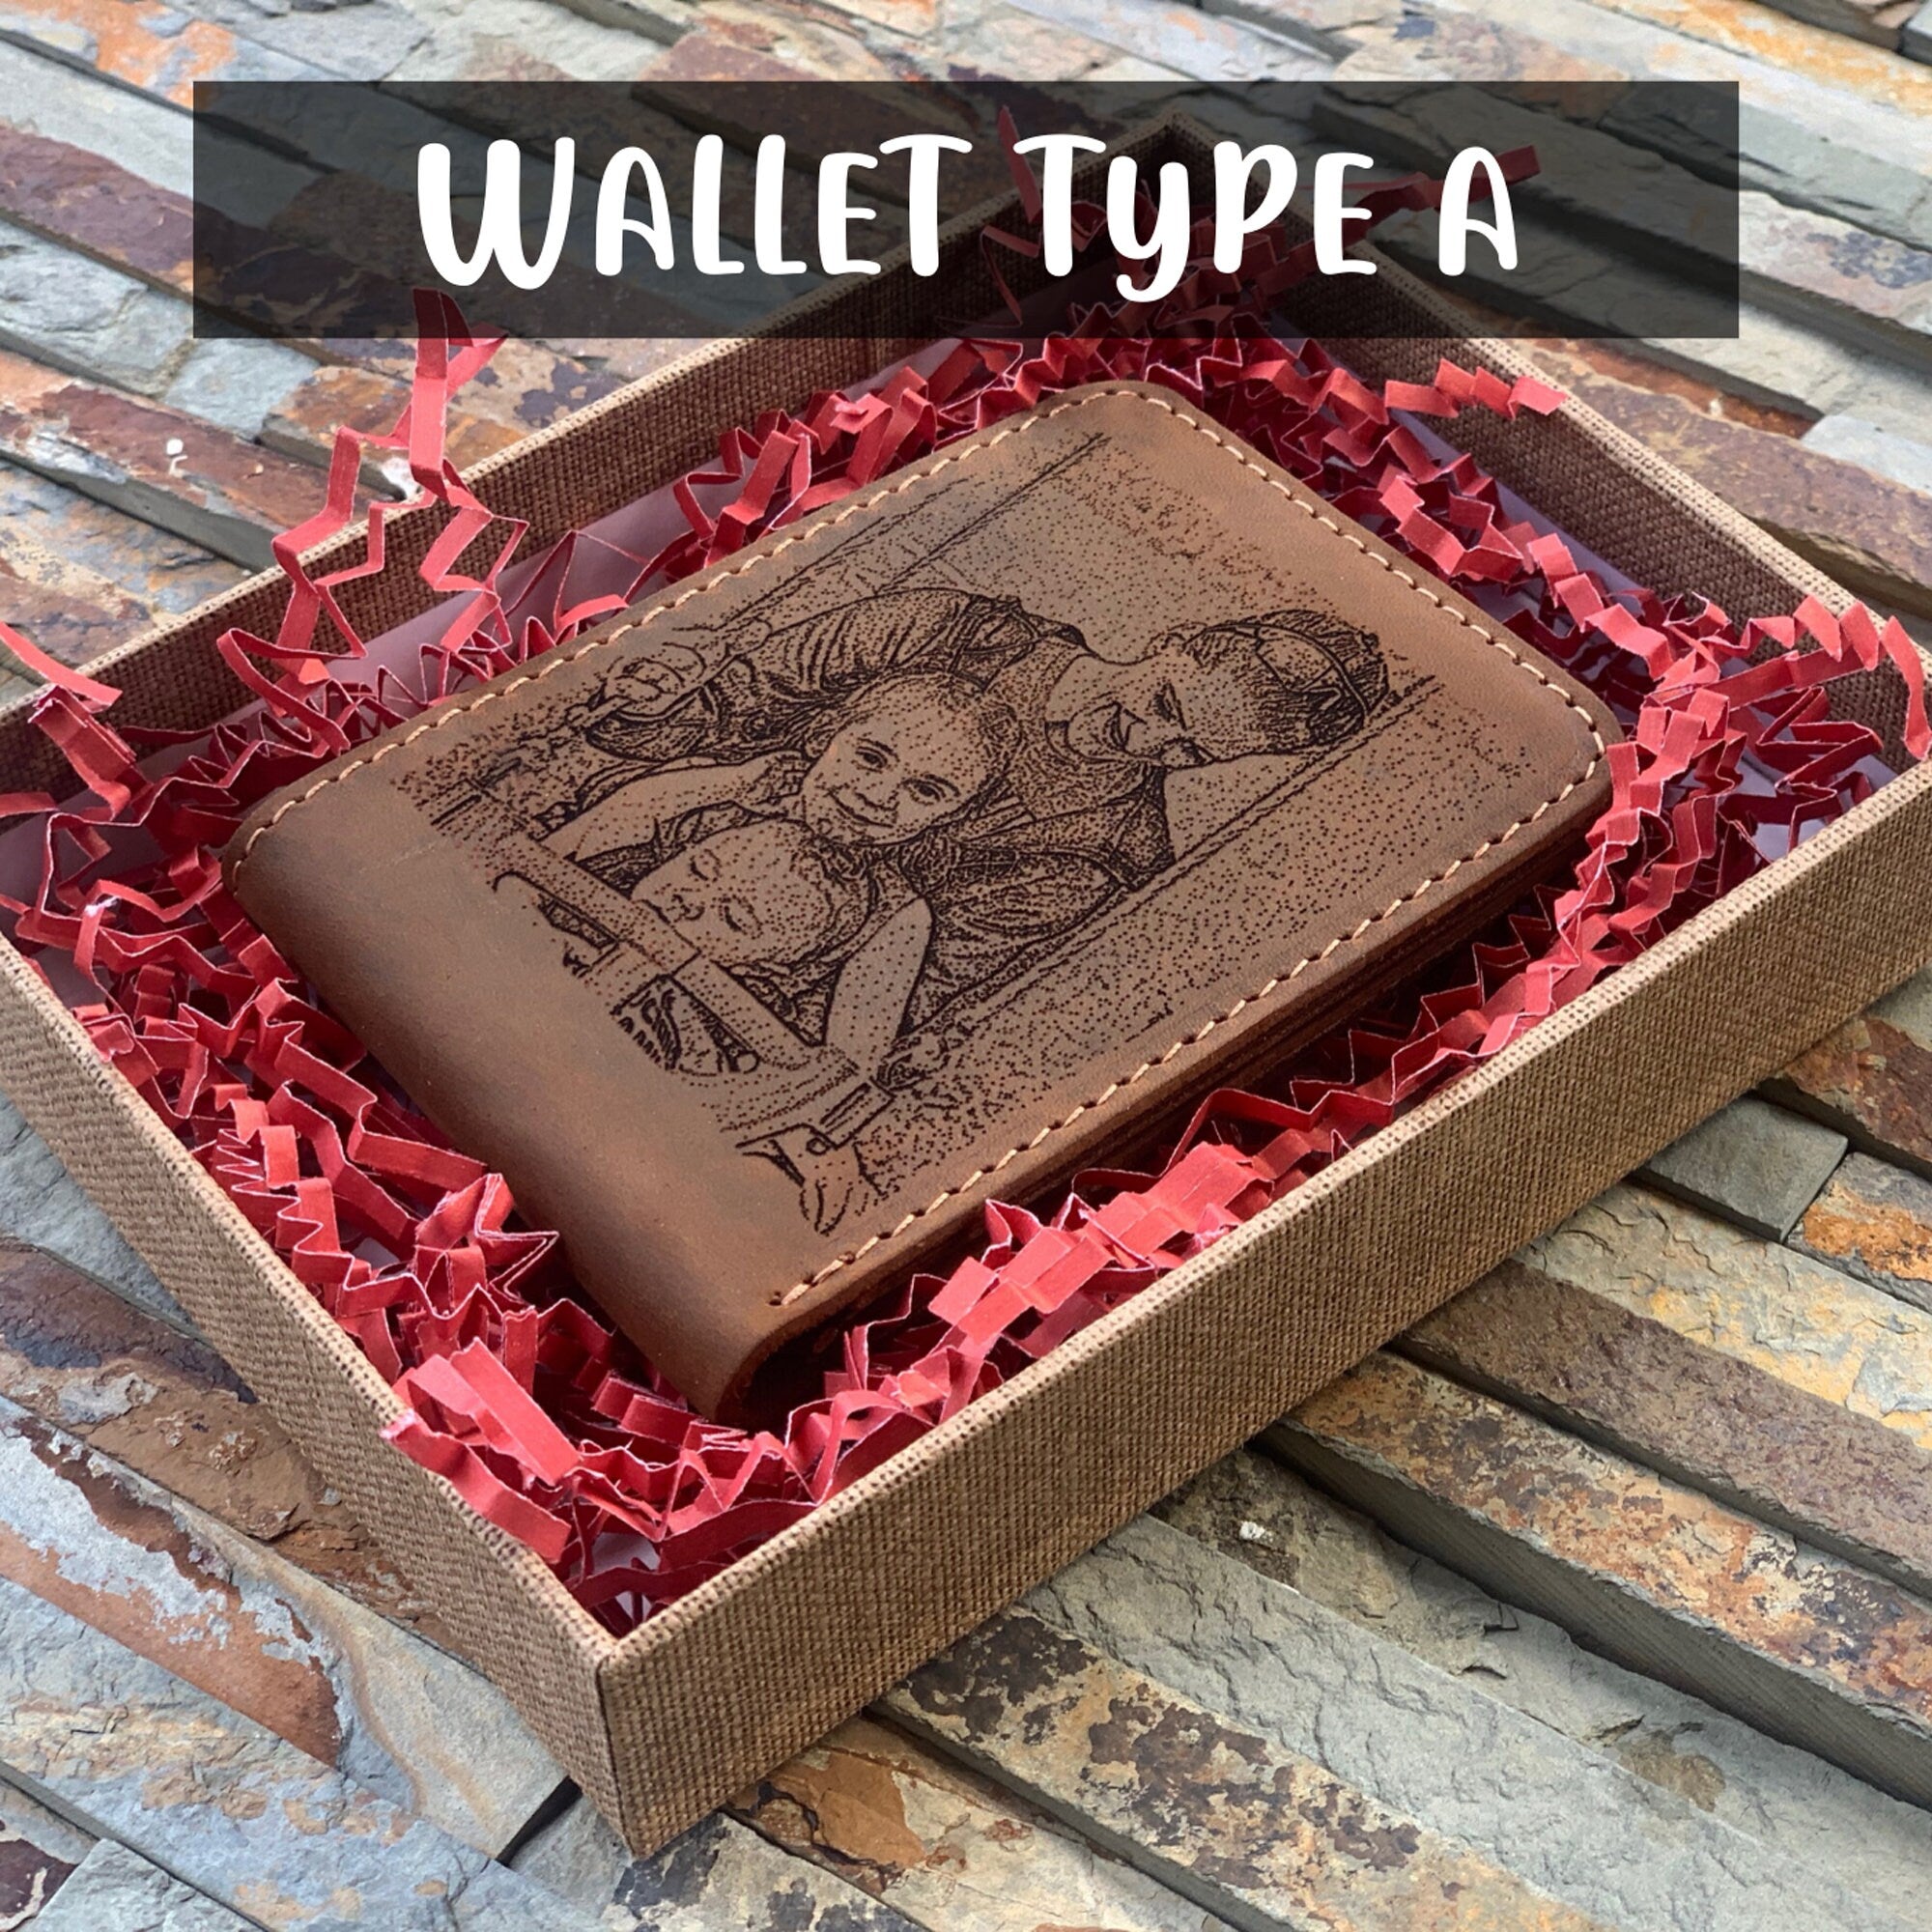 Leather Wallet, Personalized wallet, Picture Engraved Wallet, Handmade Distressed Leather Wallet, Cowhide Leather, Anniversary Gift